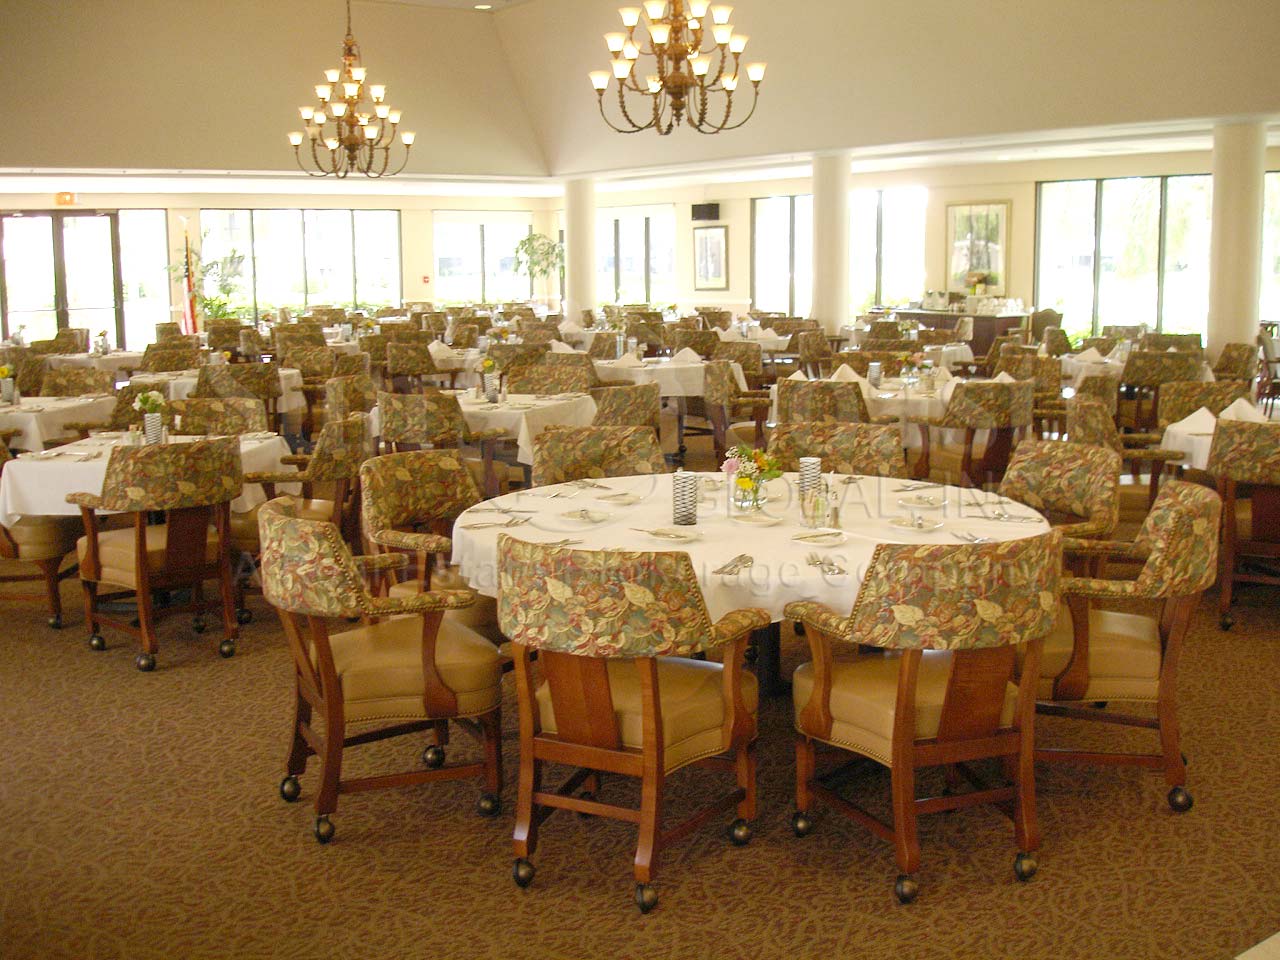 ARBOR TRACE Clubhouse Dining Room